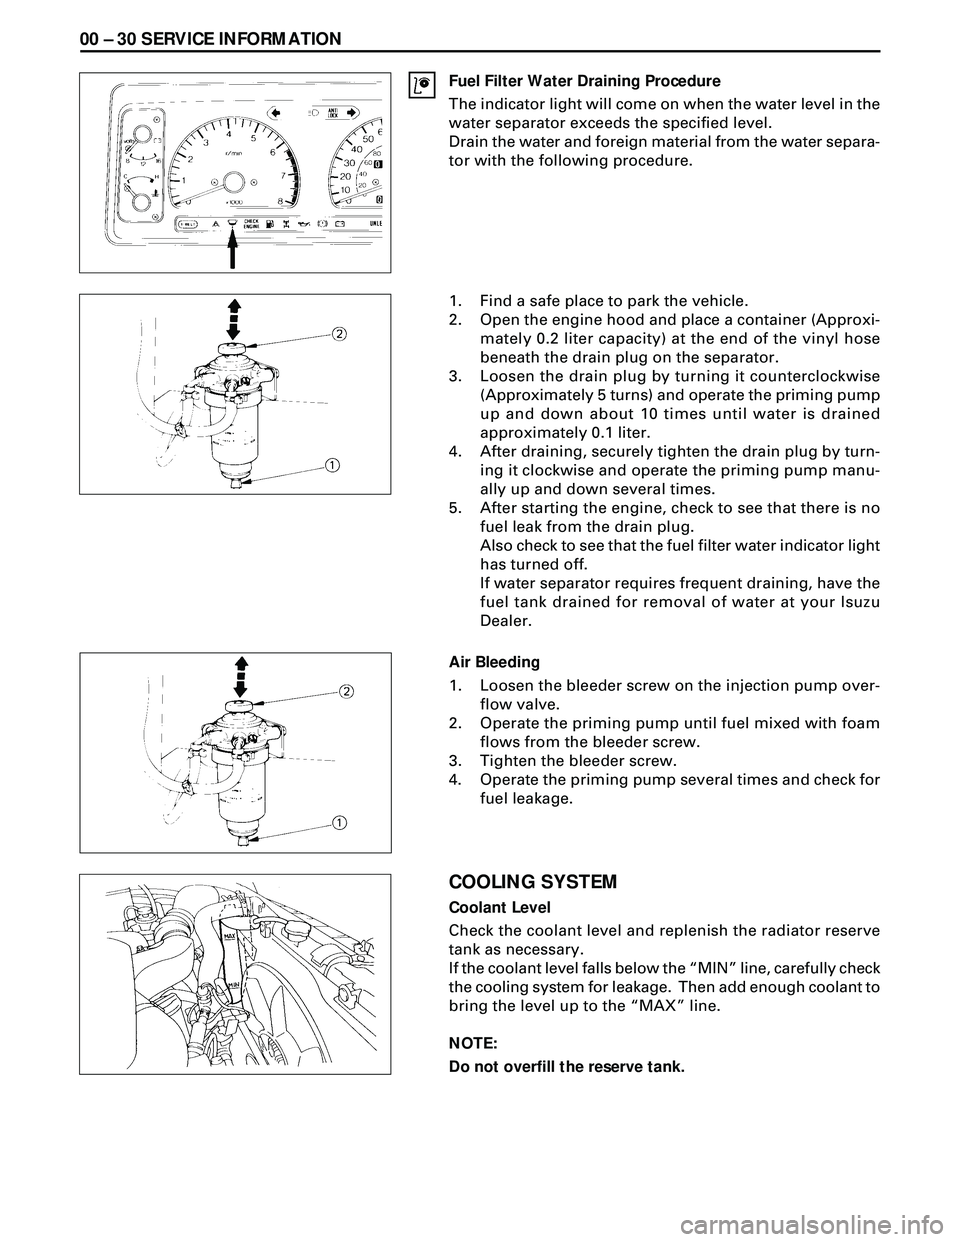 ISUZU TROOPER 1998  Service Repair Manual 00 Ð 30 SERVICE INFORMATION
Fuel Filter Water Draining Procedure
The indicator light will come on when the water level in the
water separator exceeds the specified level.
Drain the water and foreign 